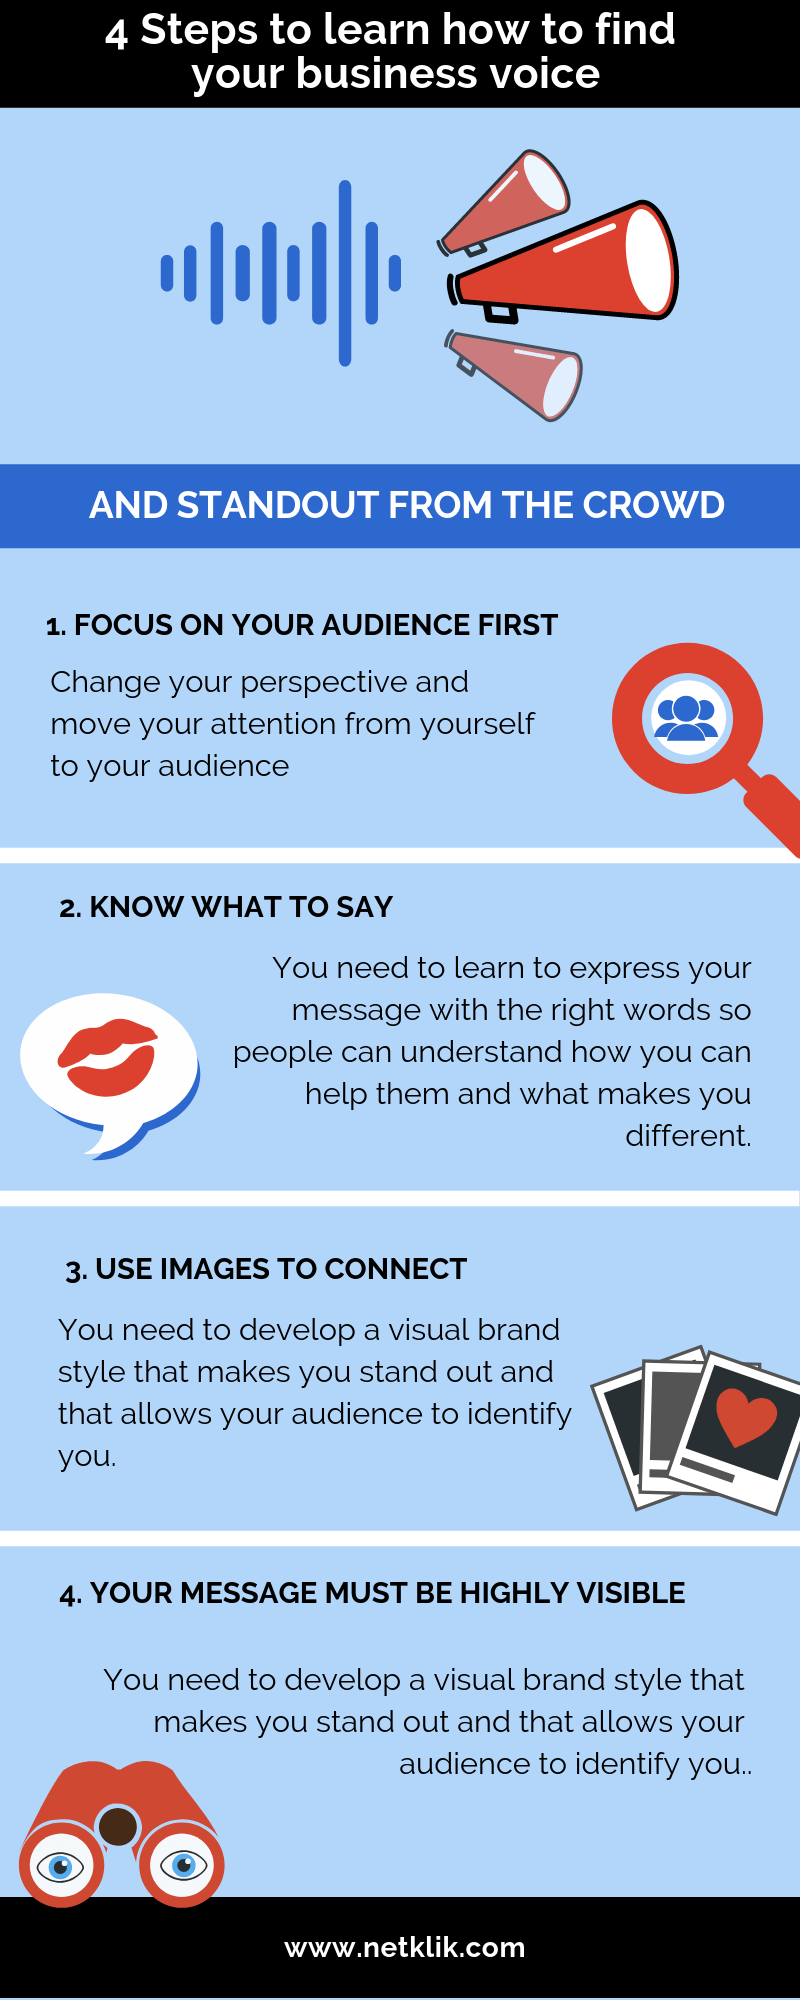 How to find your business voice